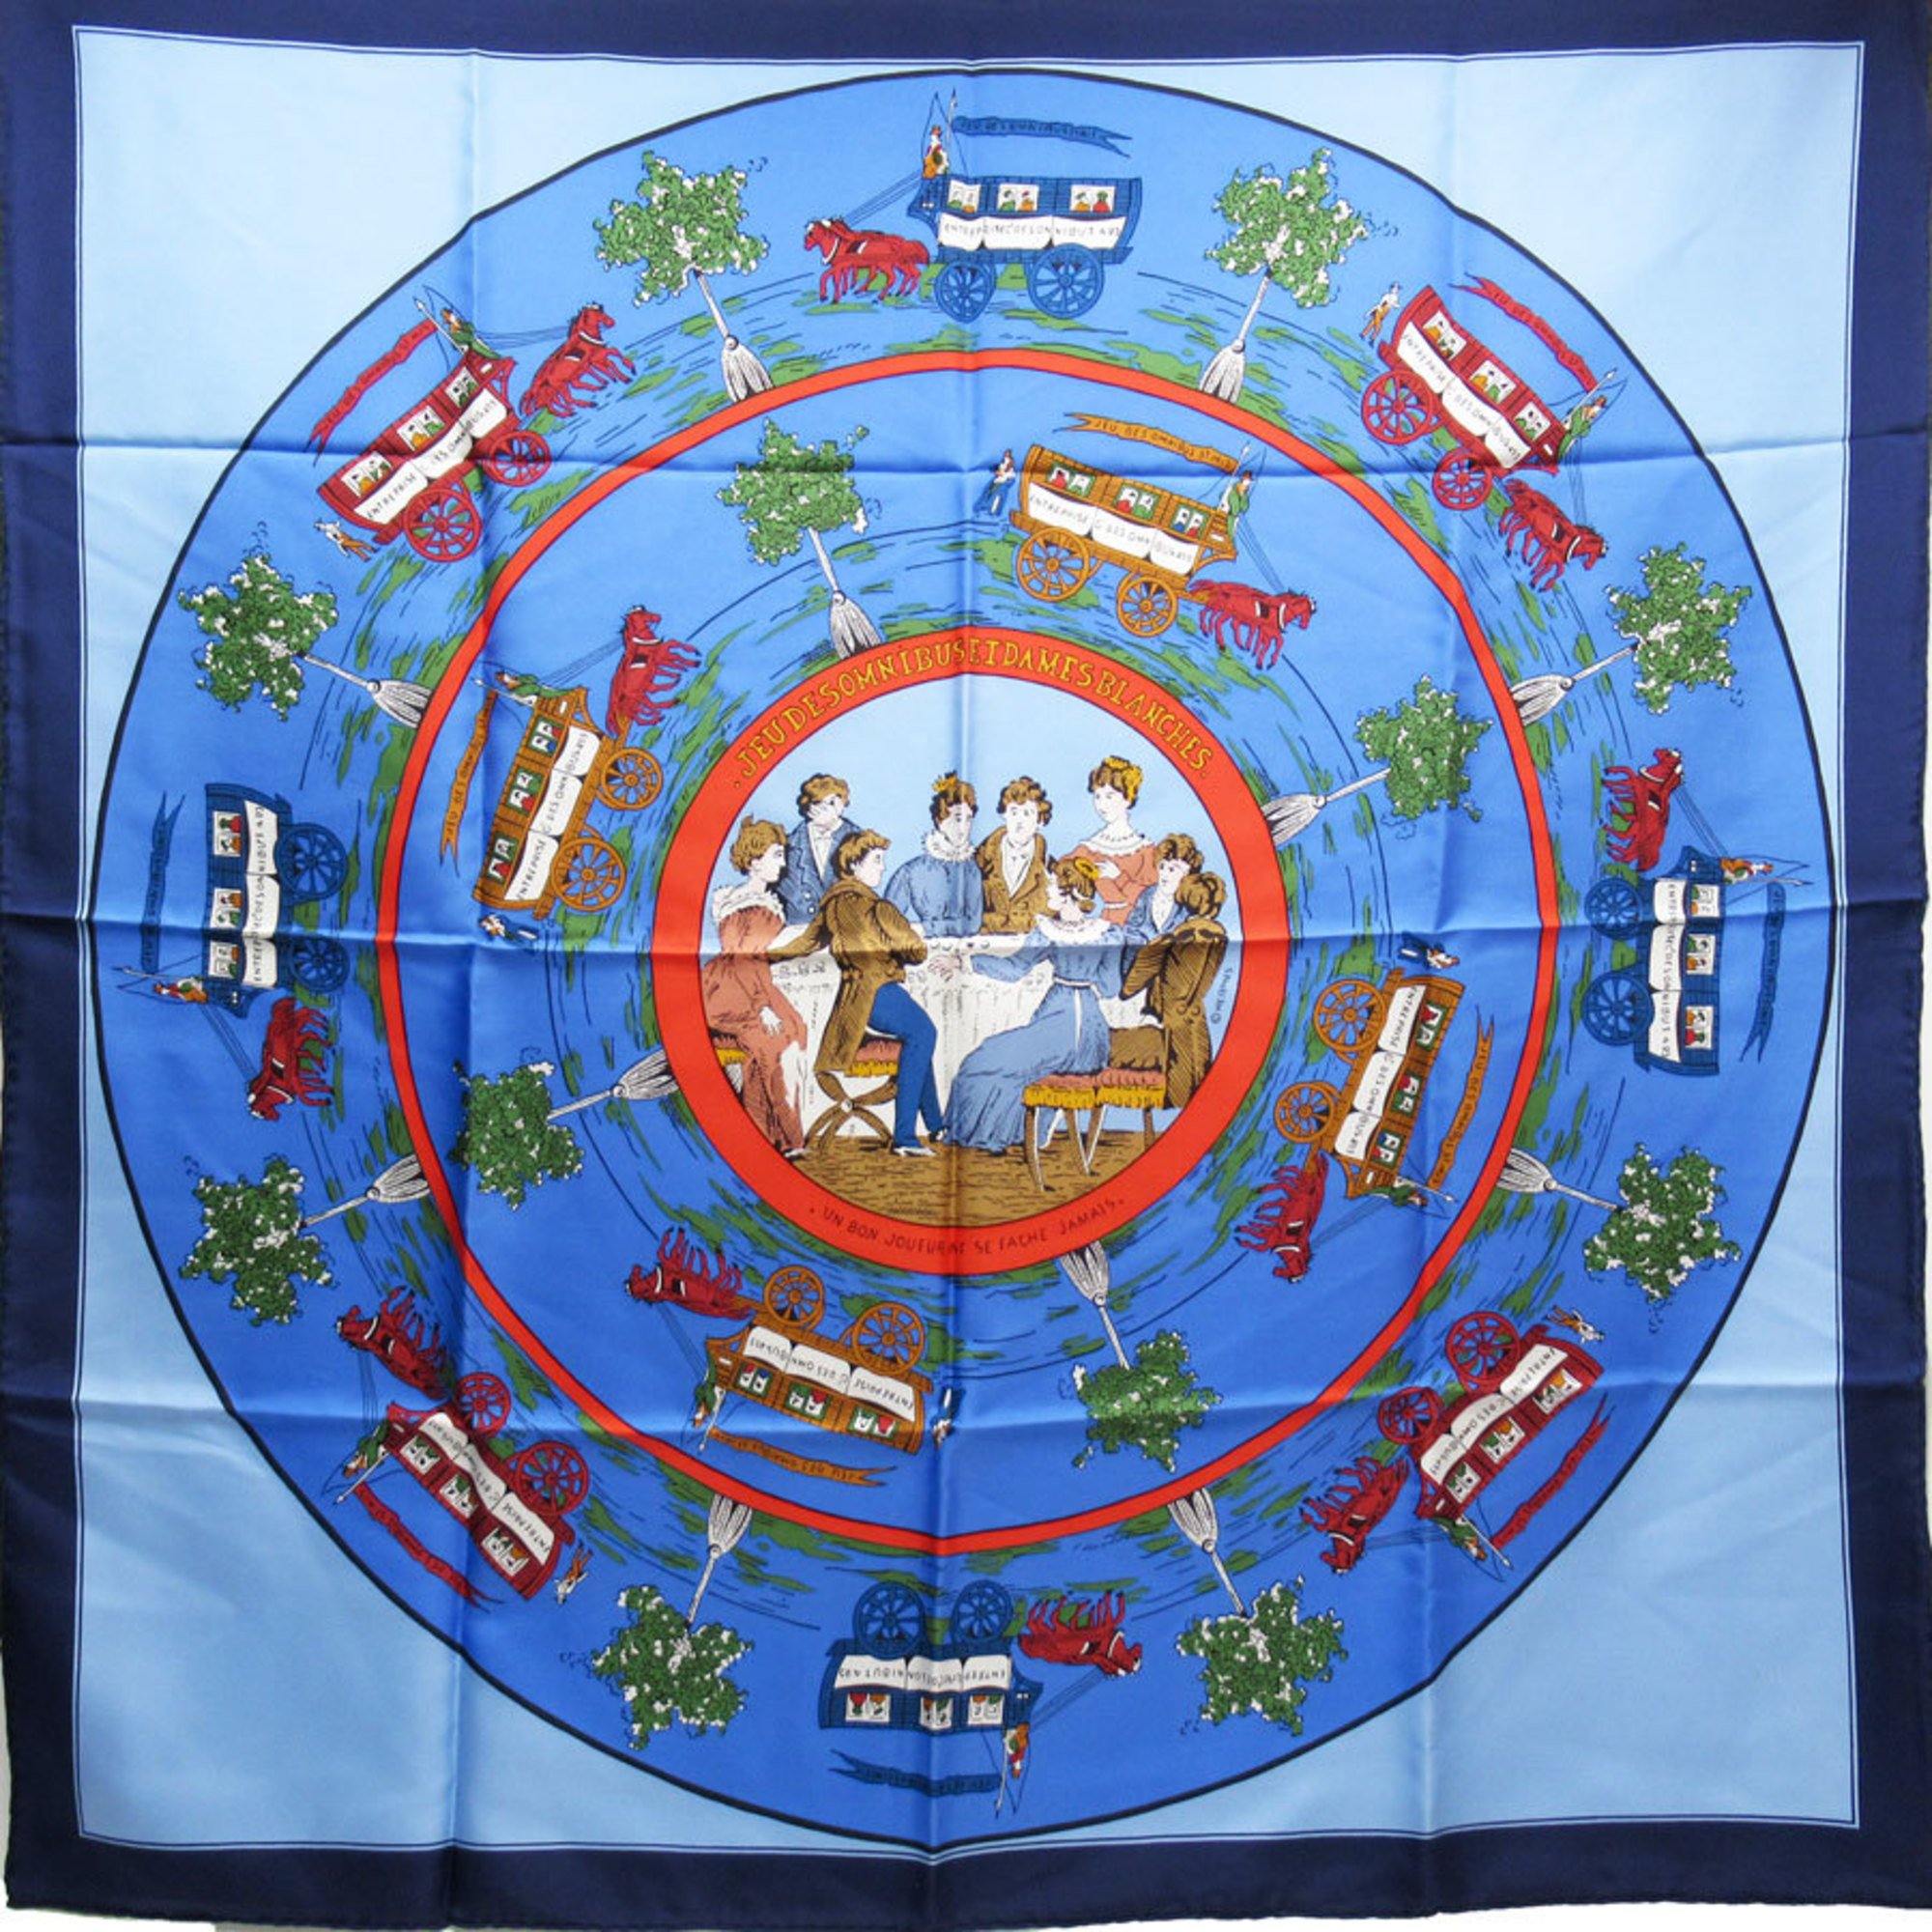 Hermes Scarf Carre 90 JEU DES OMNIBUS ET DAMES BLANCHES Omnibus and Lady's Game Blue 100% Silk